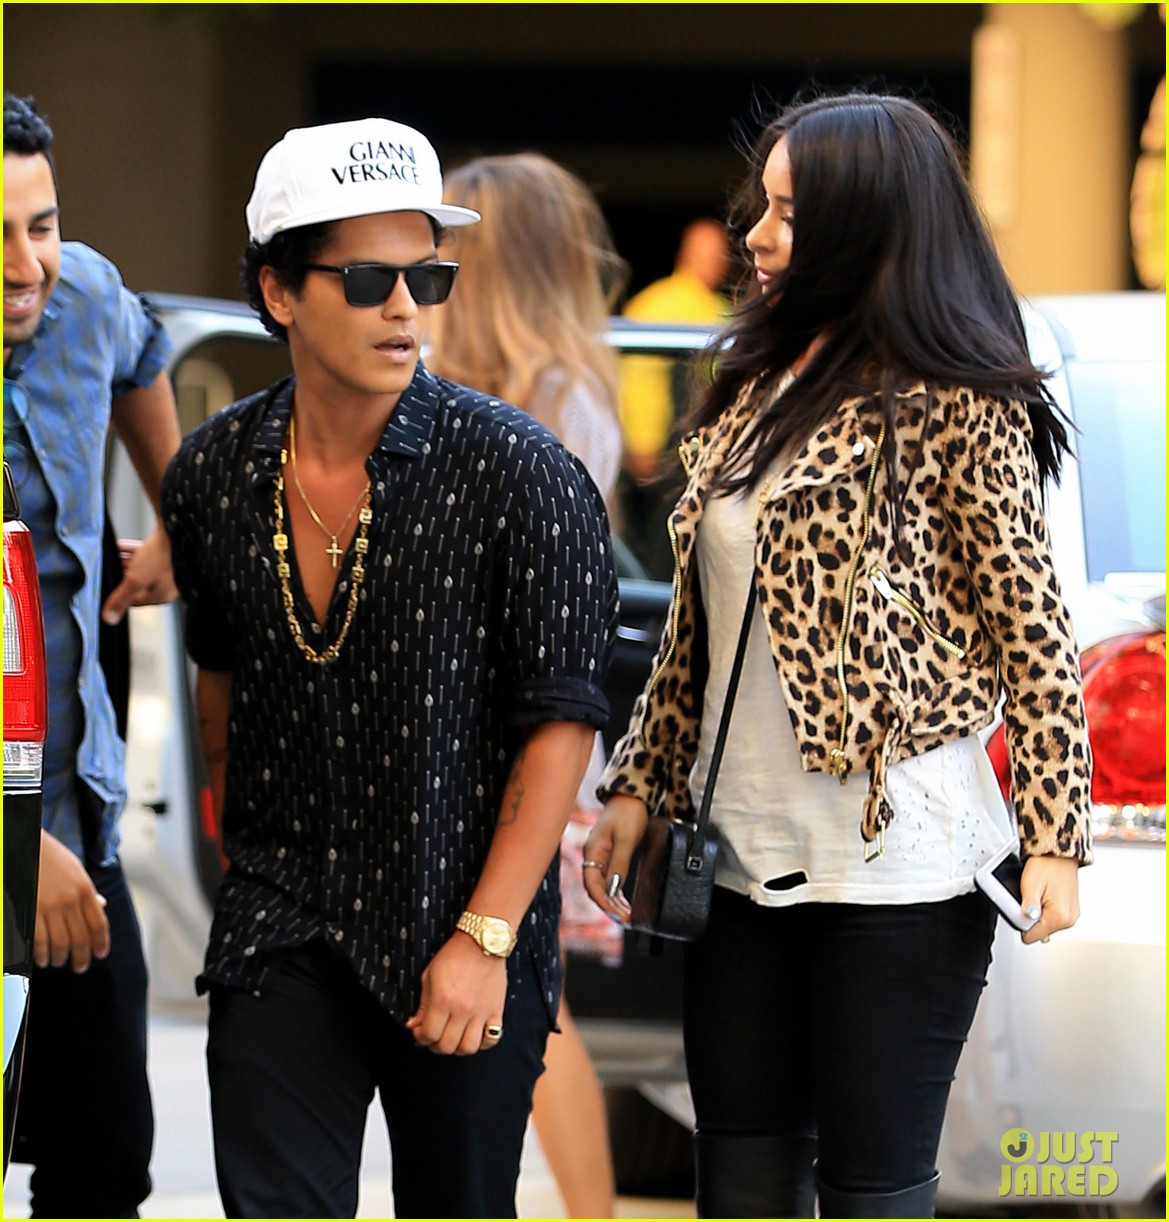 Bruno wife is who mars Jessica Caban: